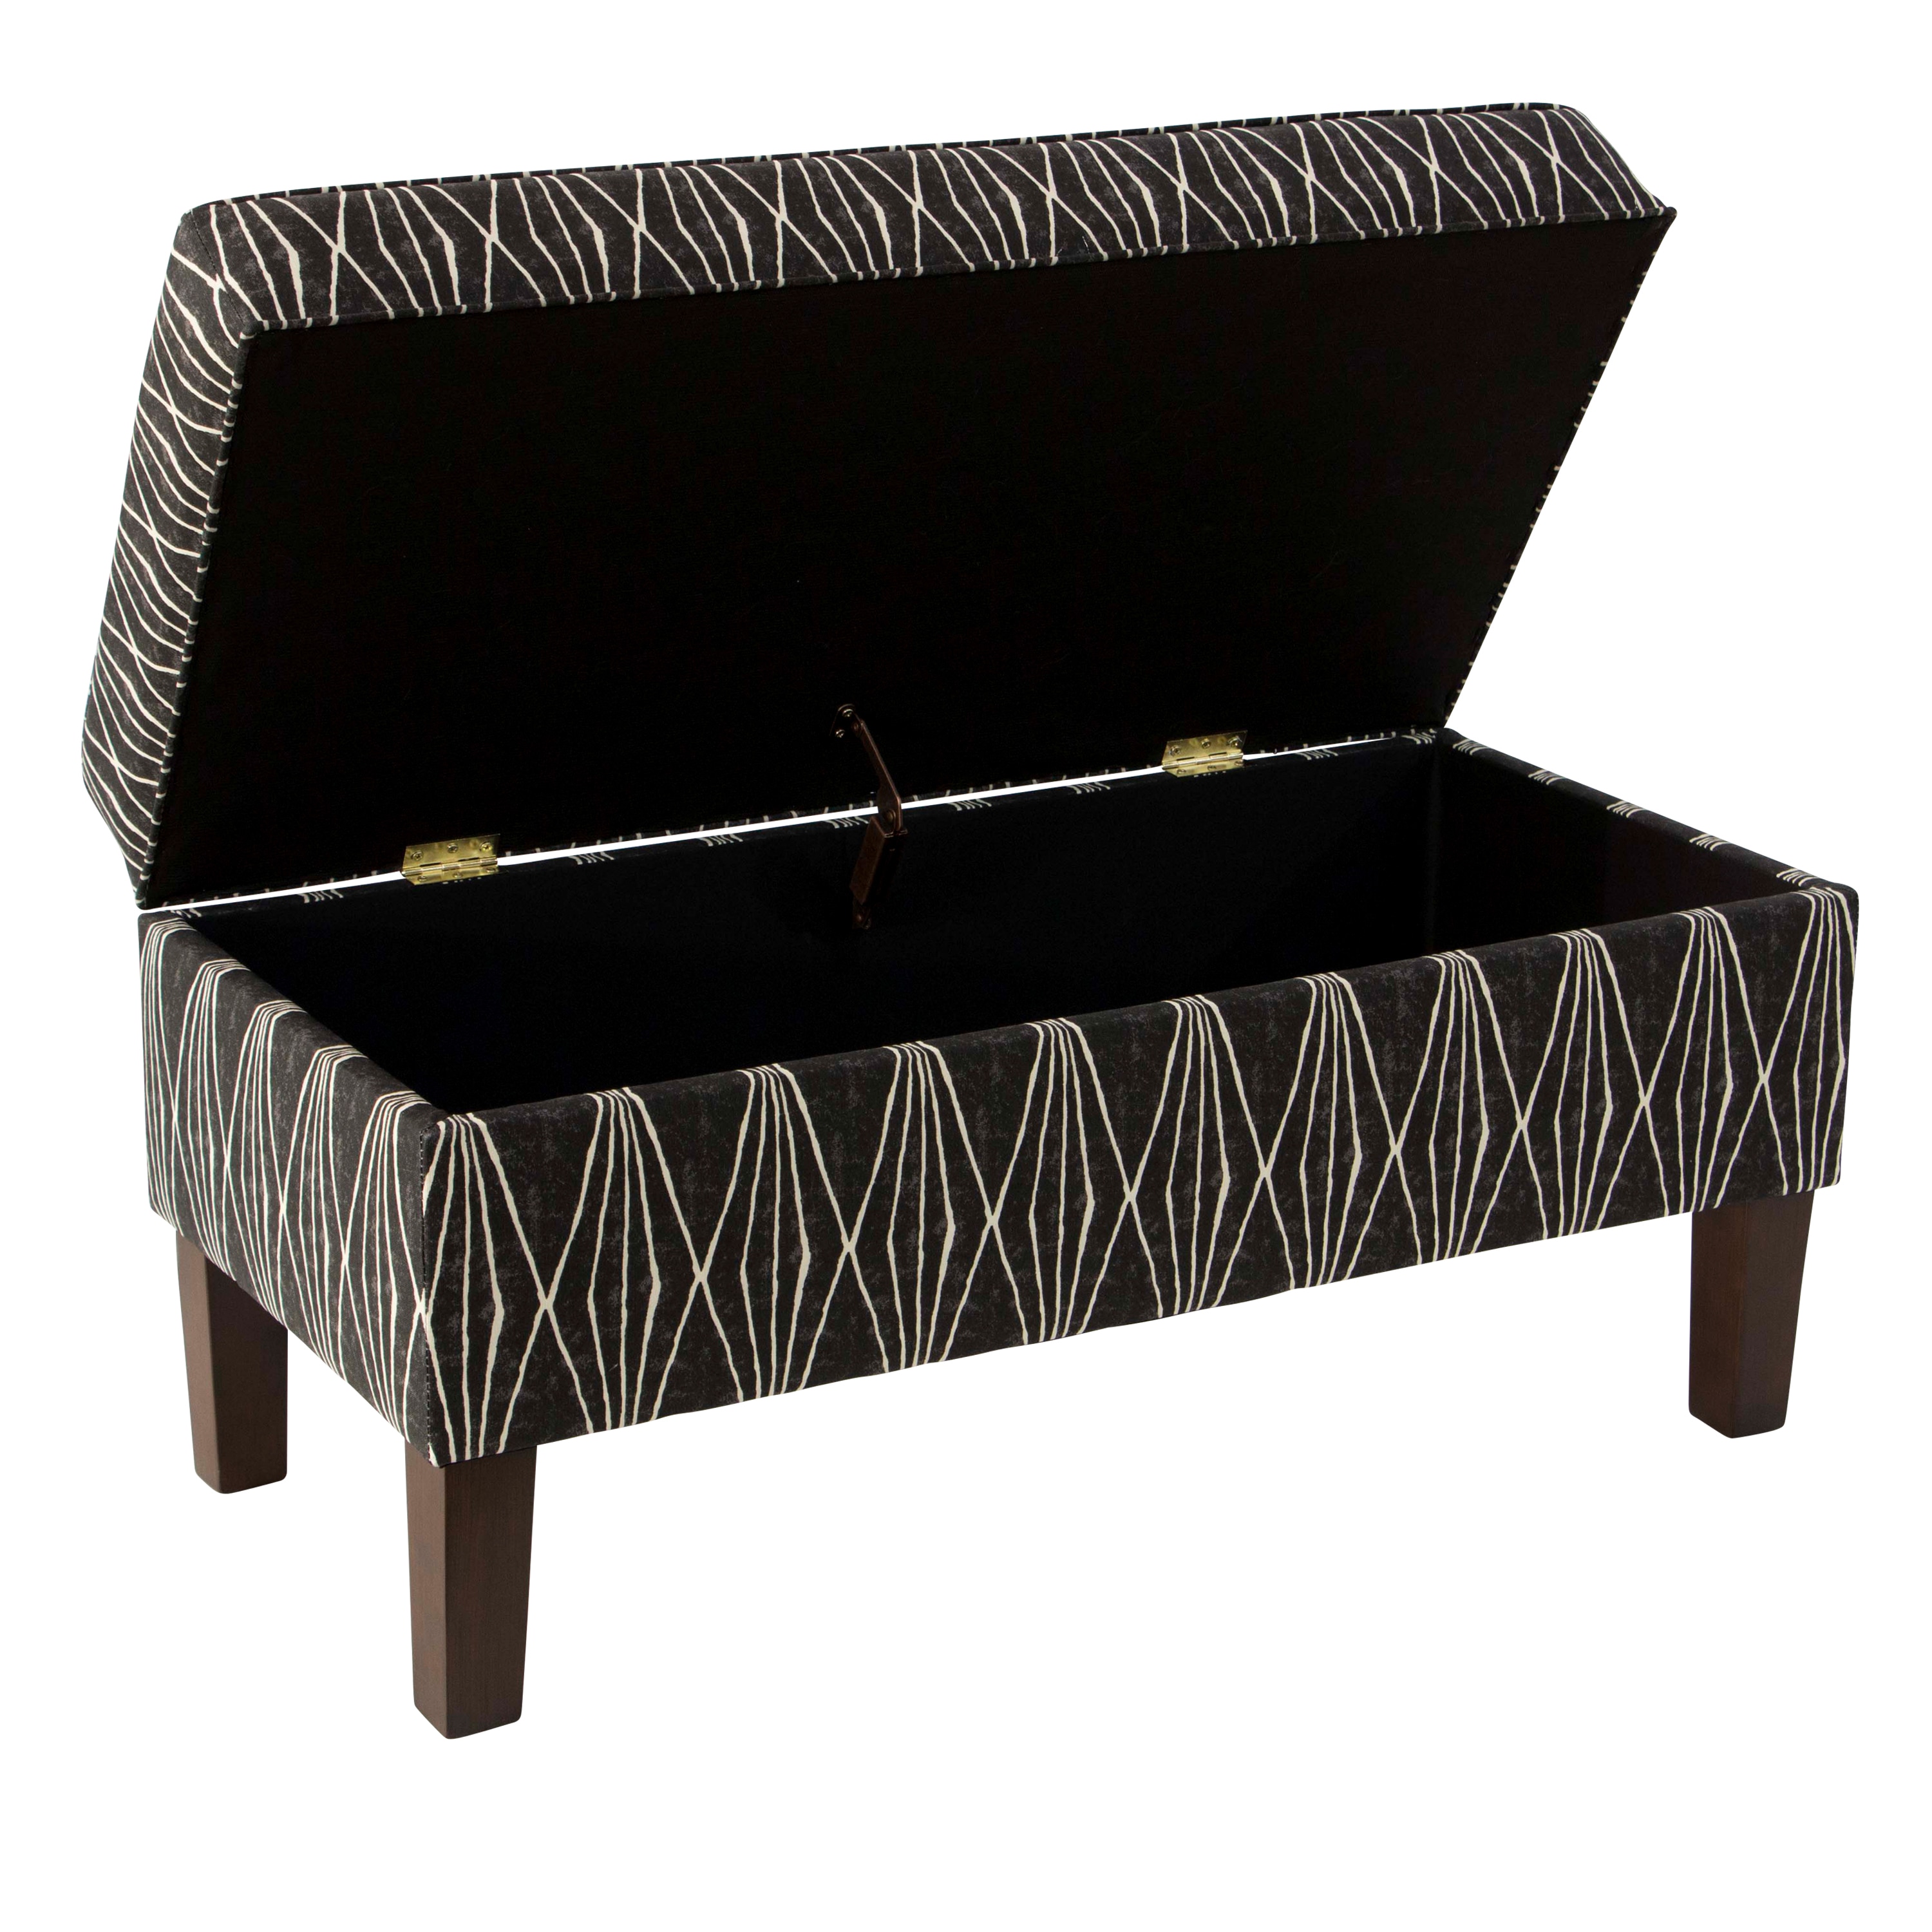 Skyline Furniture Storage Bench In Hand Shapes Coal Free